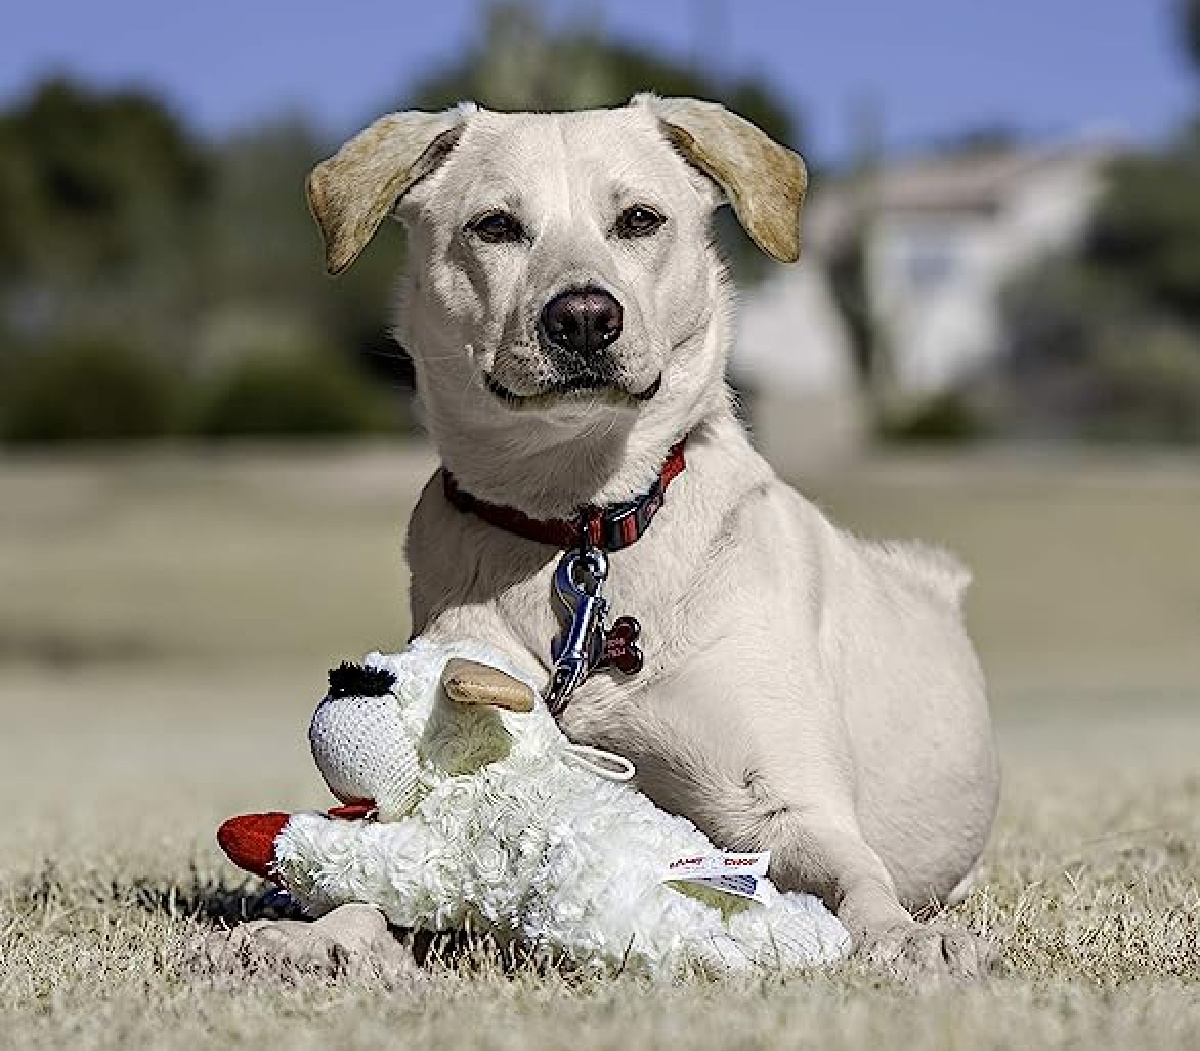 Lampchop dog toy is one of the best amazon stocking stuffers for dogs